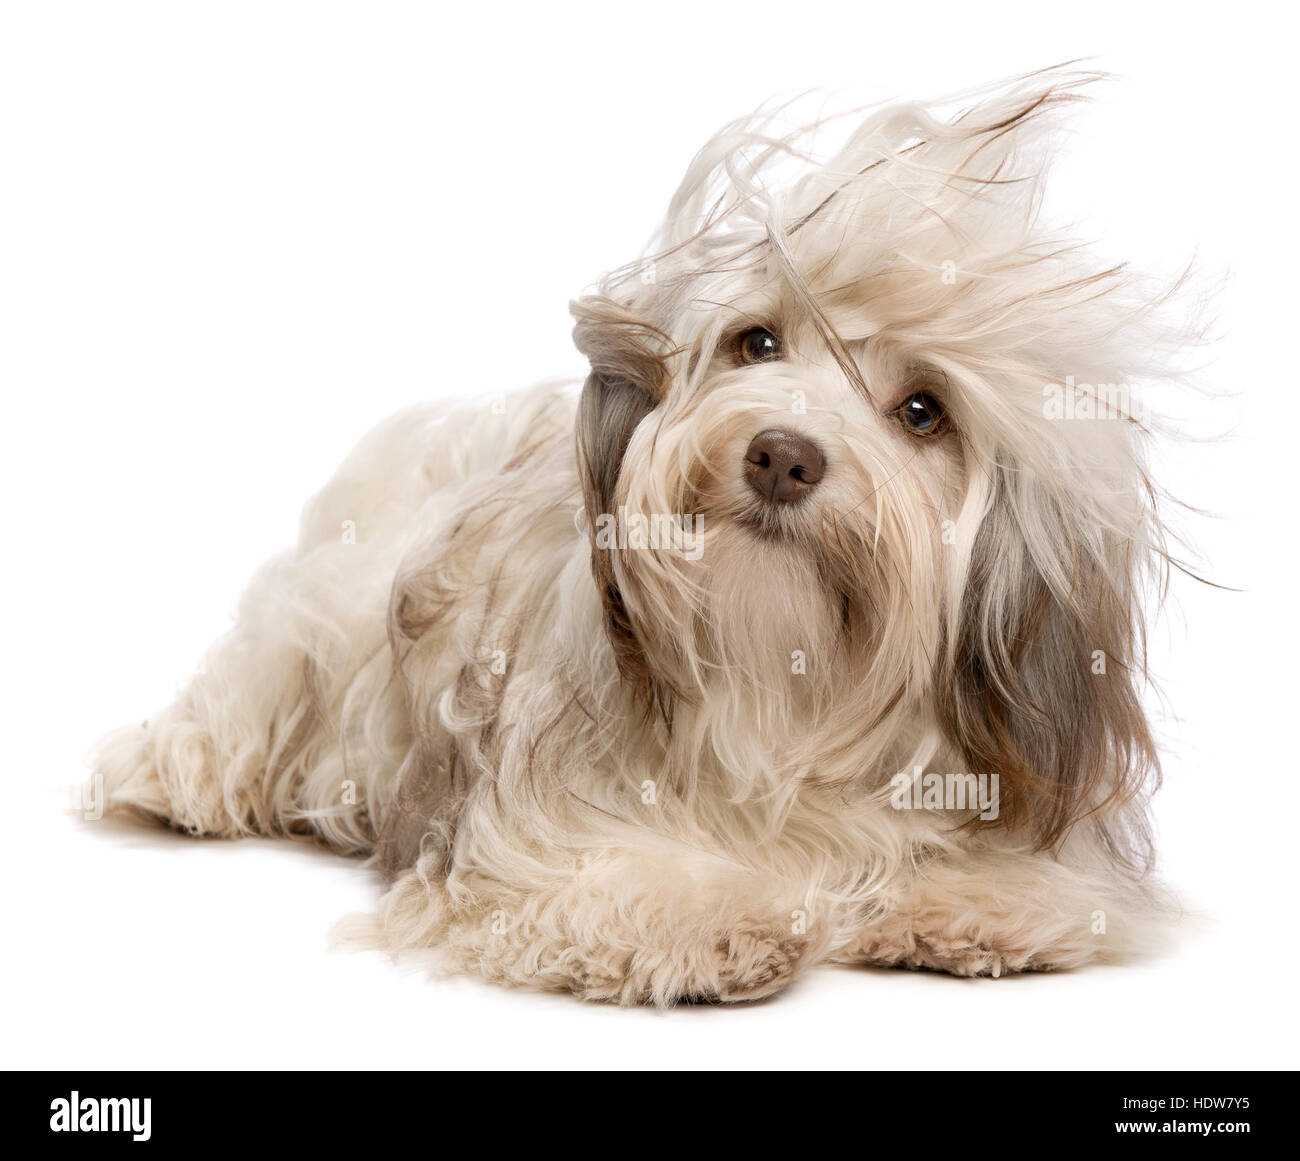 Cute chocolate colored havanese puppy dog lying in wind Stock Photo